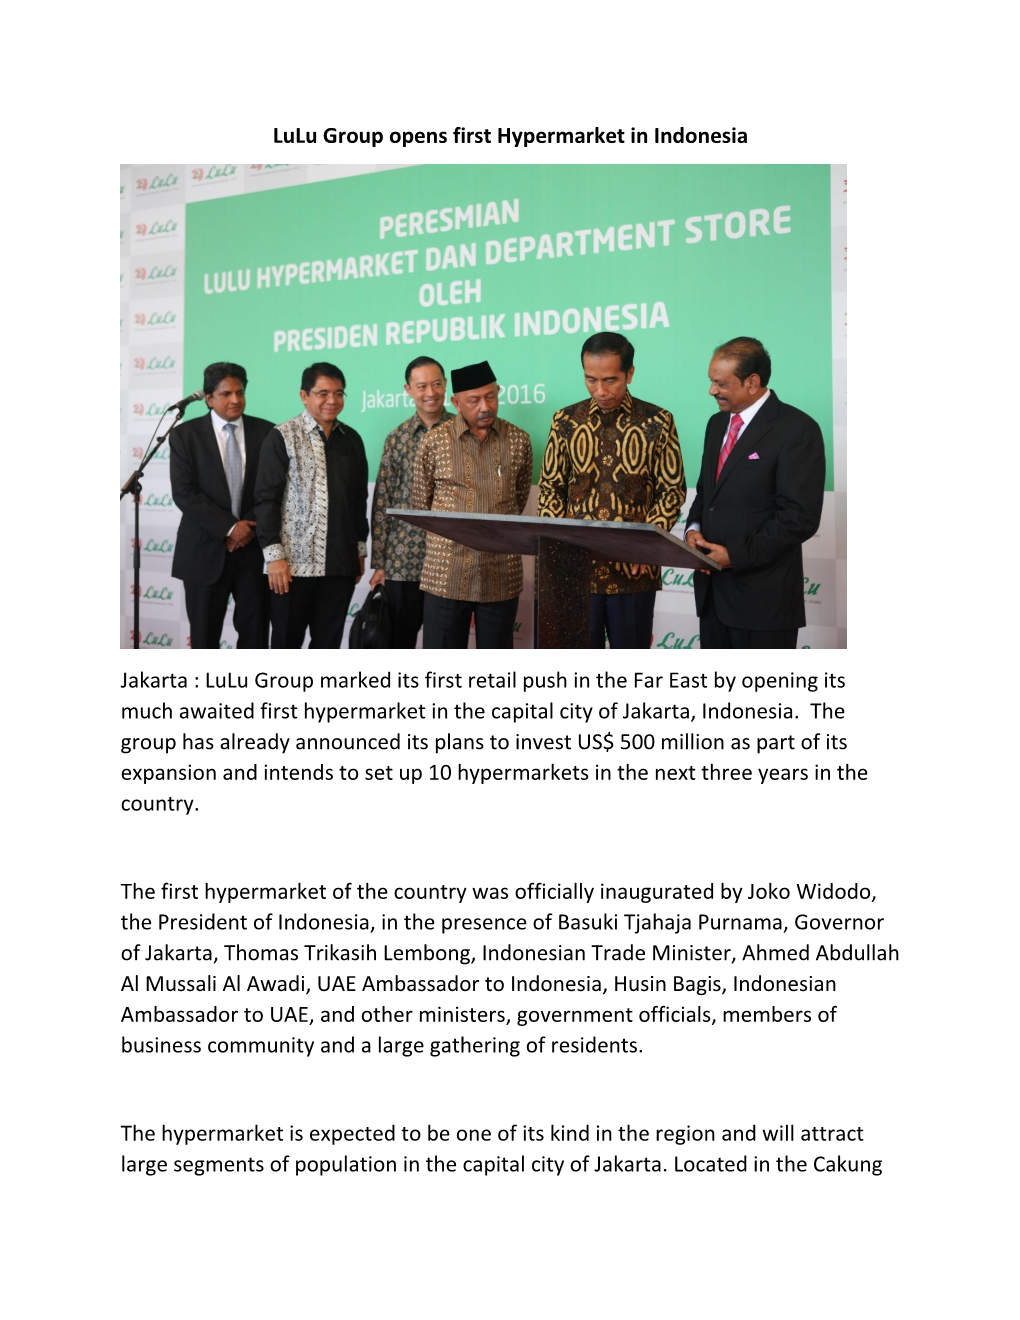 Lulu Group Opens First Hypermarket in Indonesia